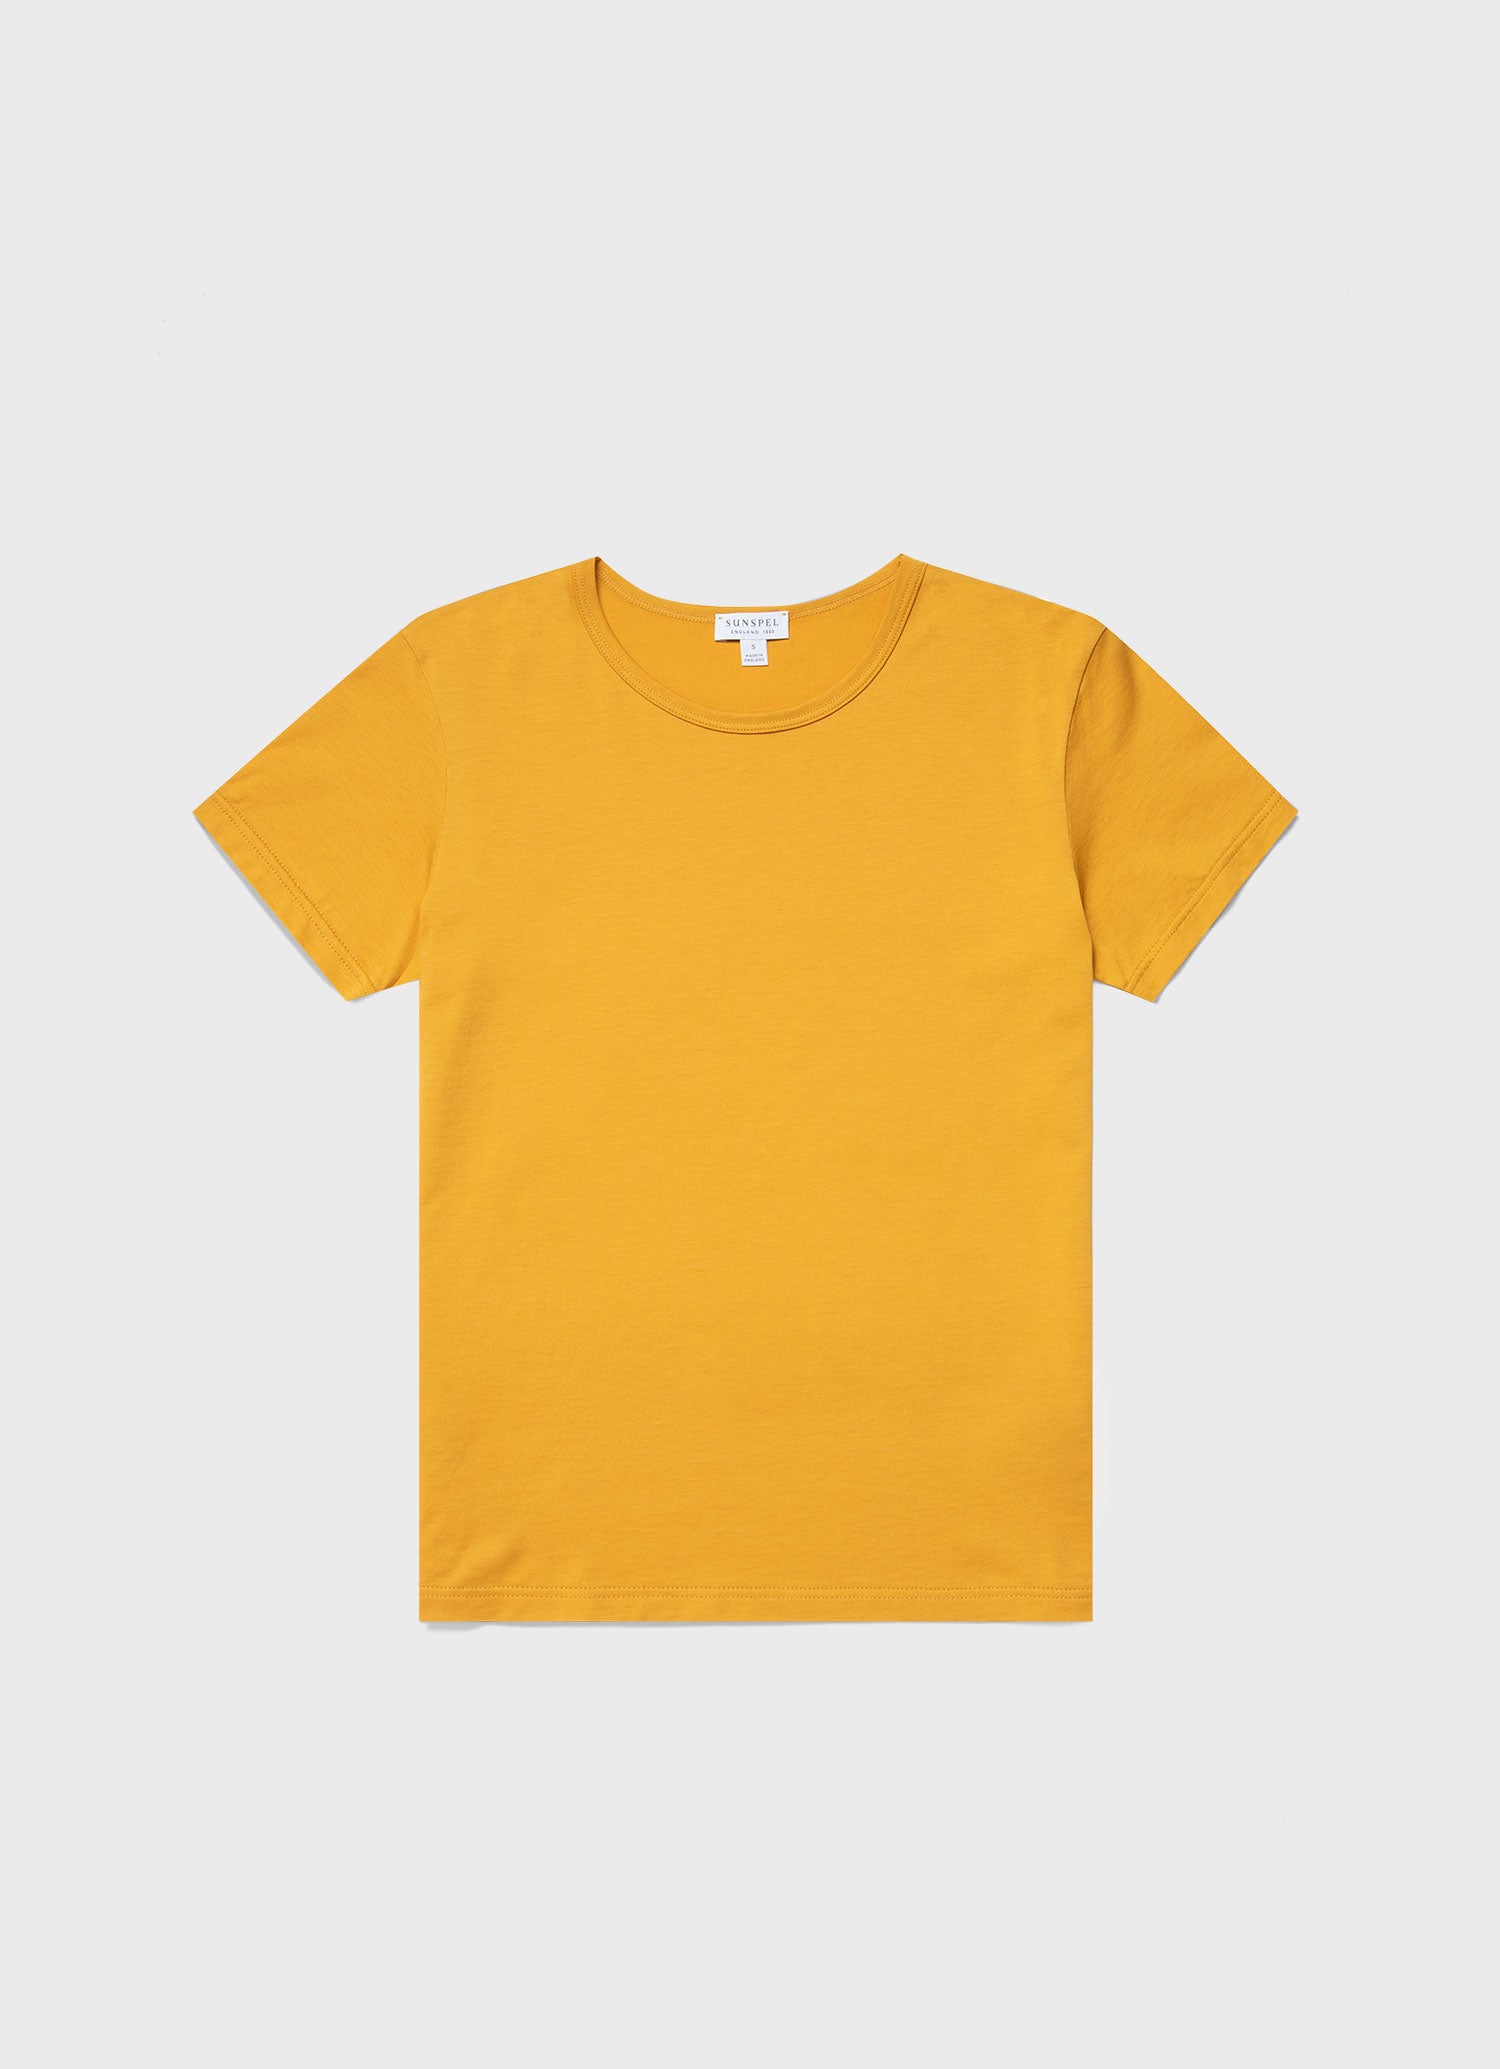 Women's Classic T-shirt in Cider